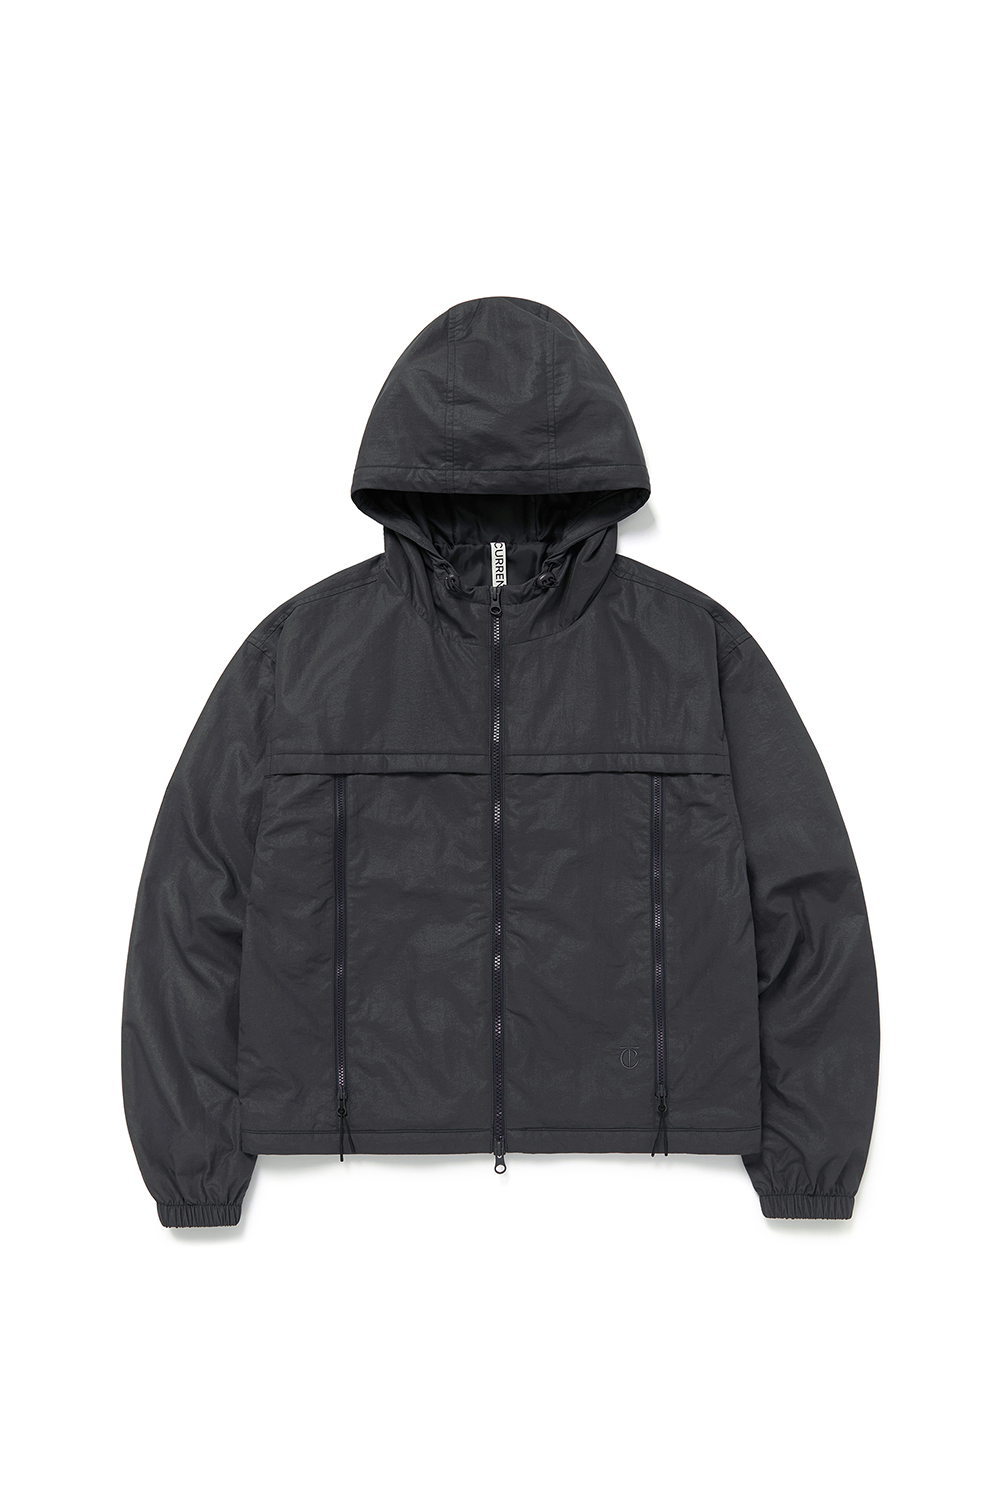 GLOSSY HOODED JUMPER [CHARCOAL]		